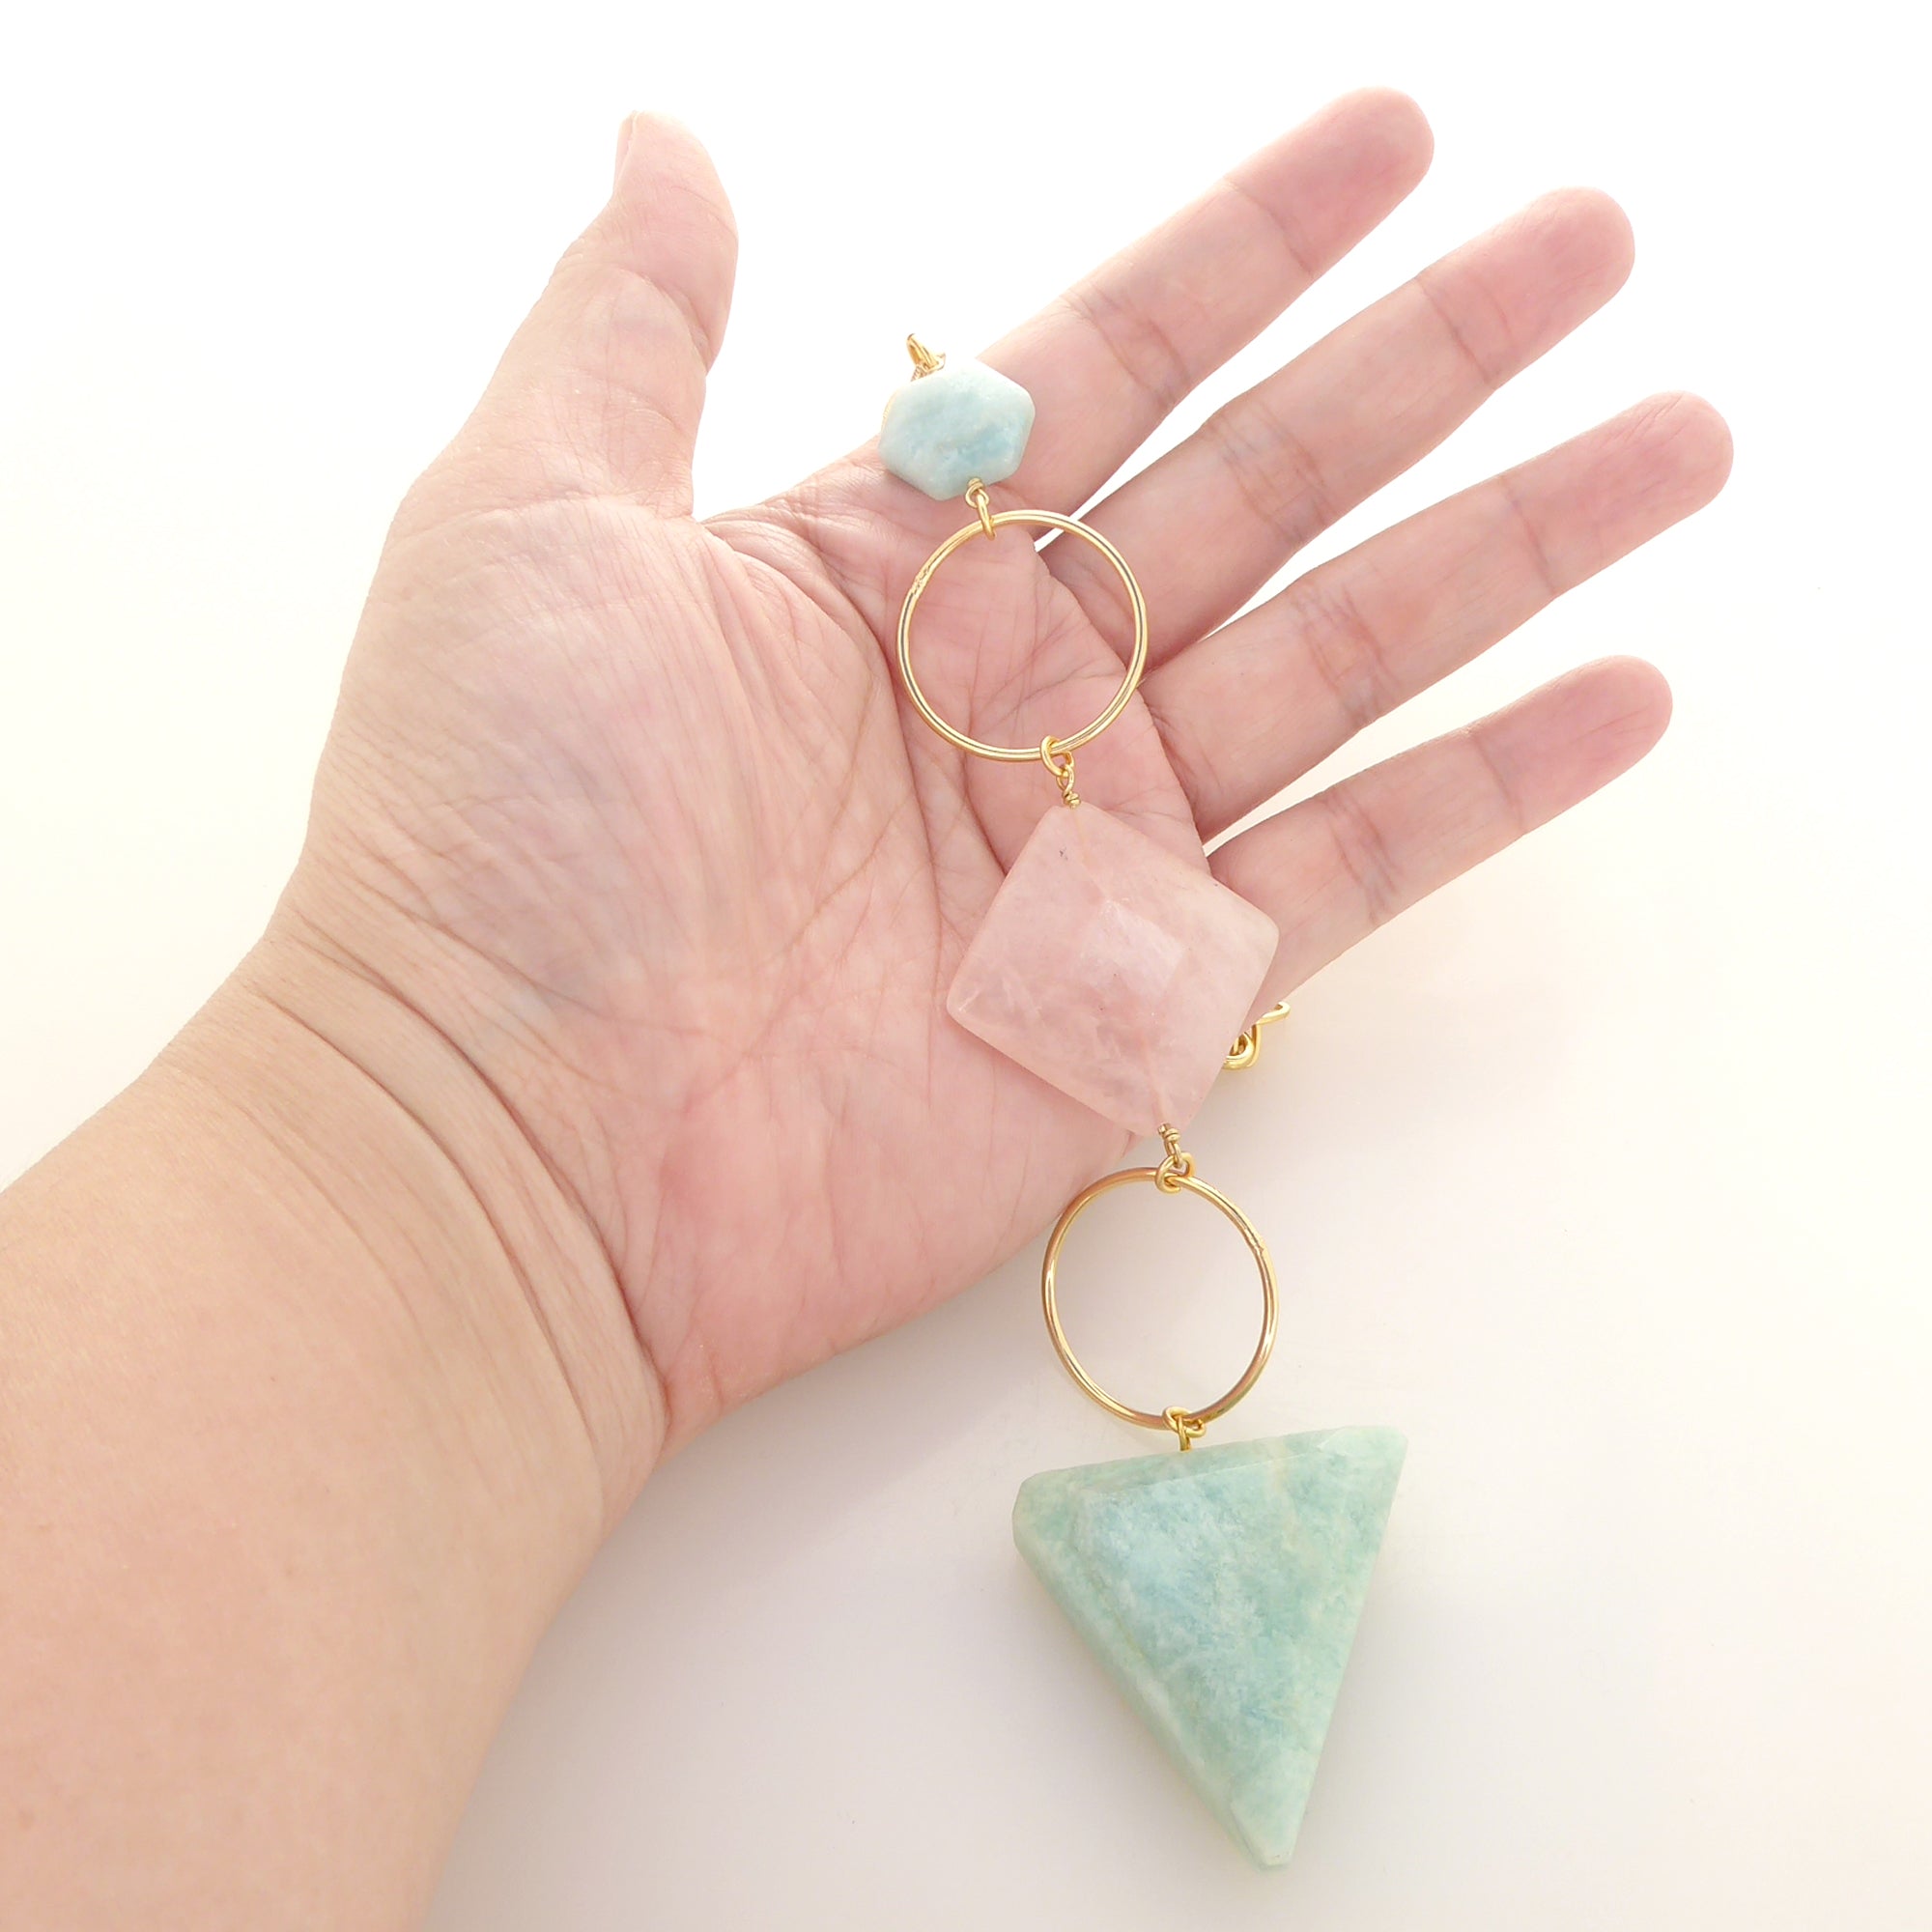 Gioia amazonite and rose quartz necklace by Jenny Dayco 7